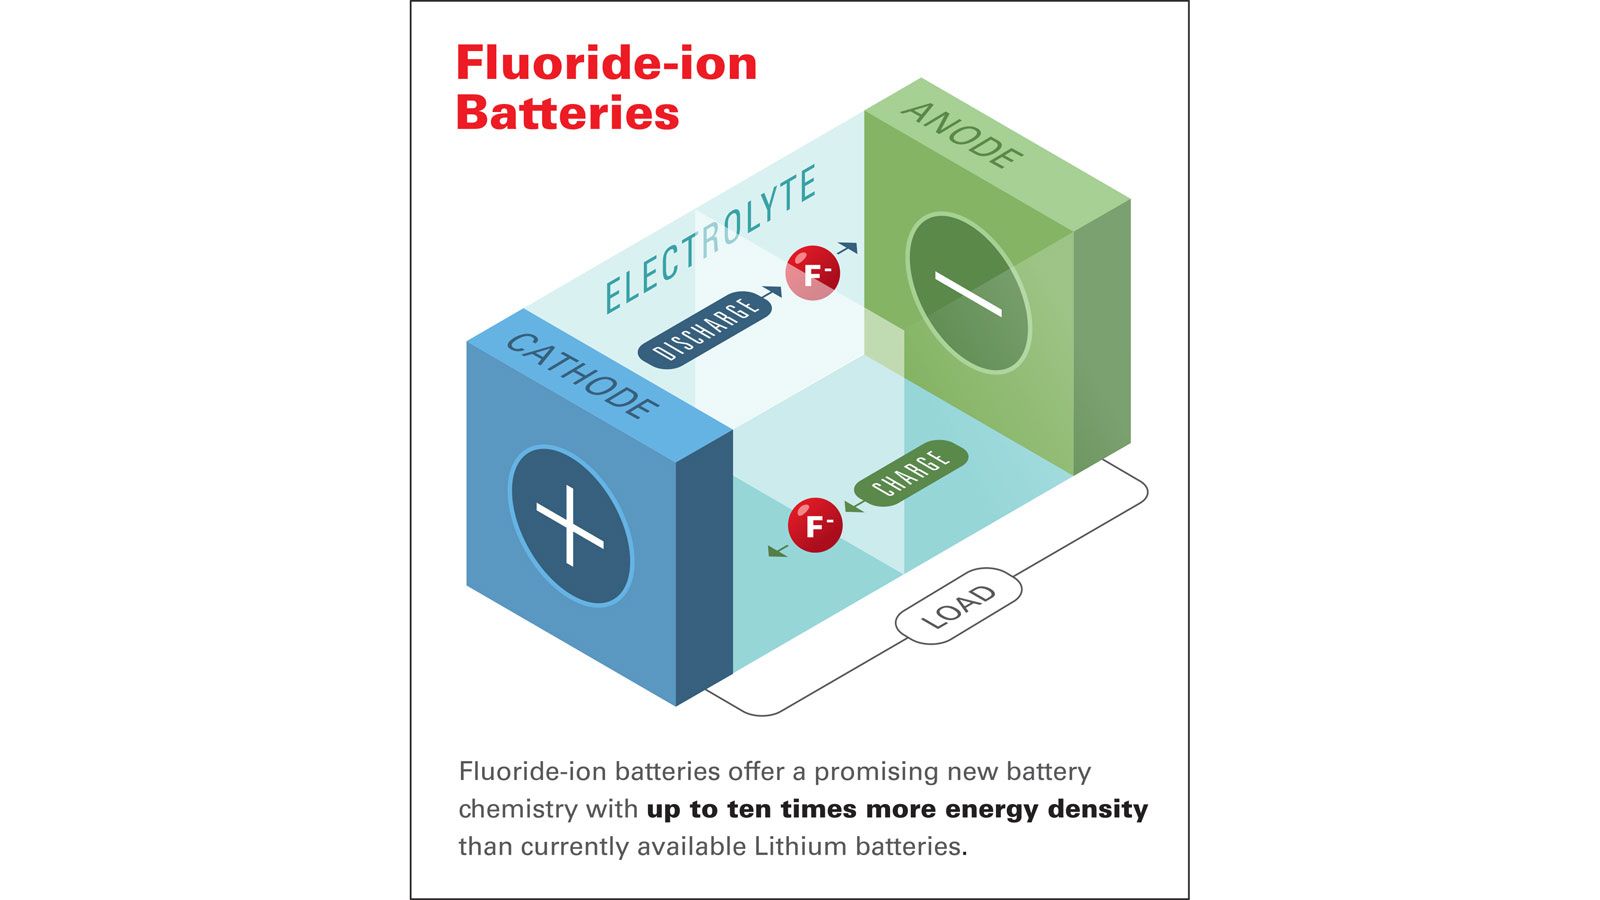 Fluoride-ion batteries can offer longer range and shorter charging times.